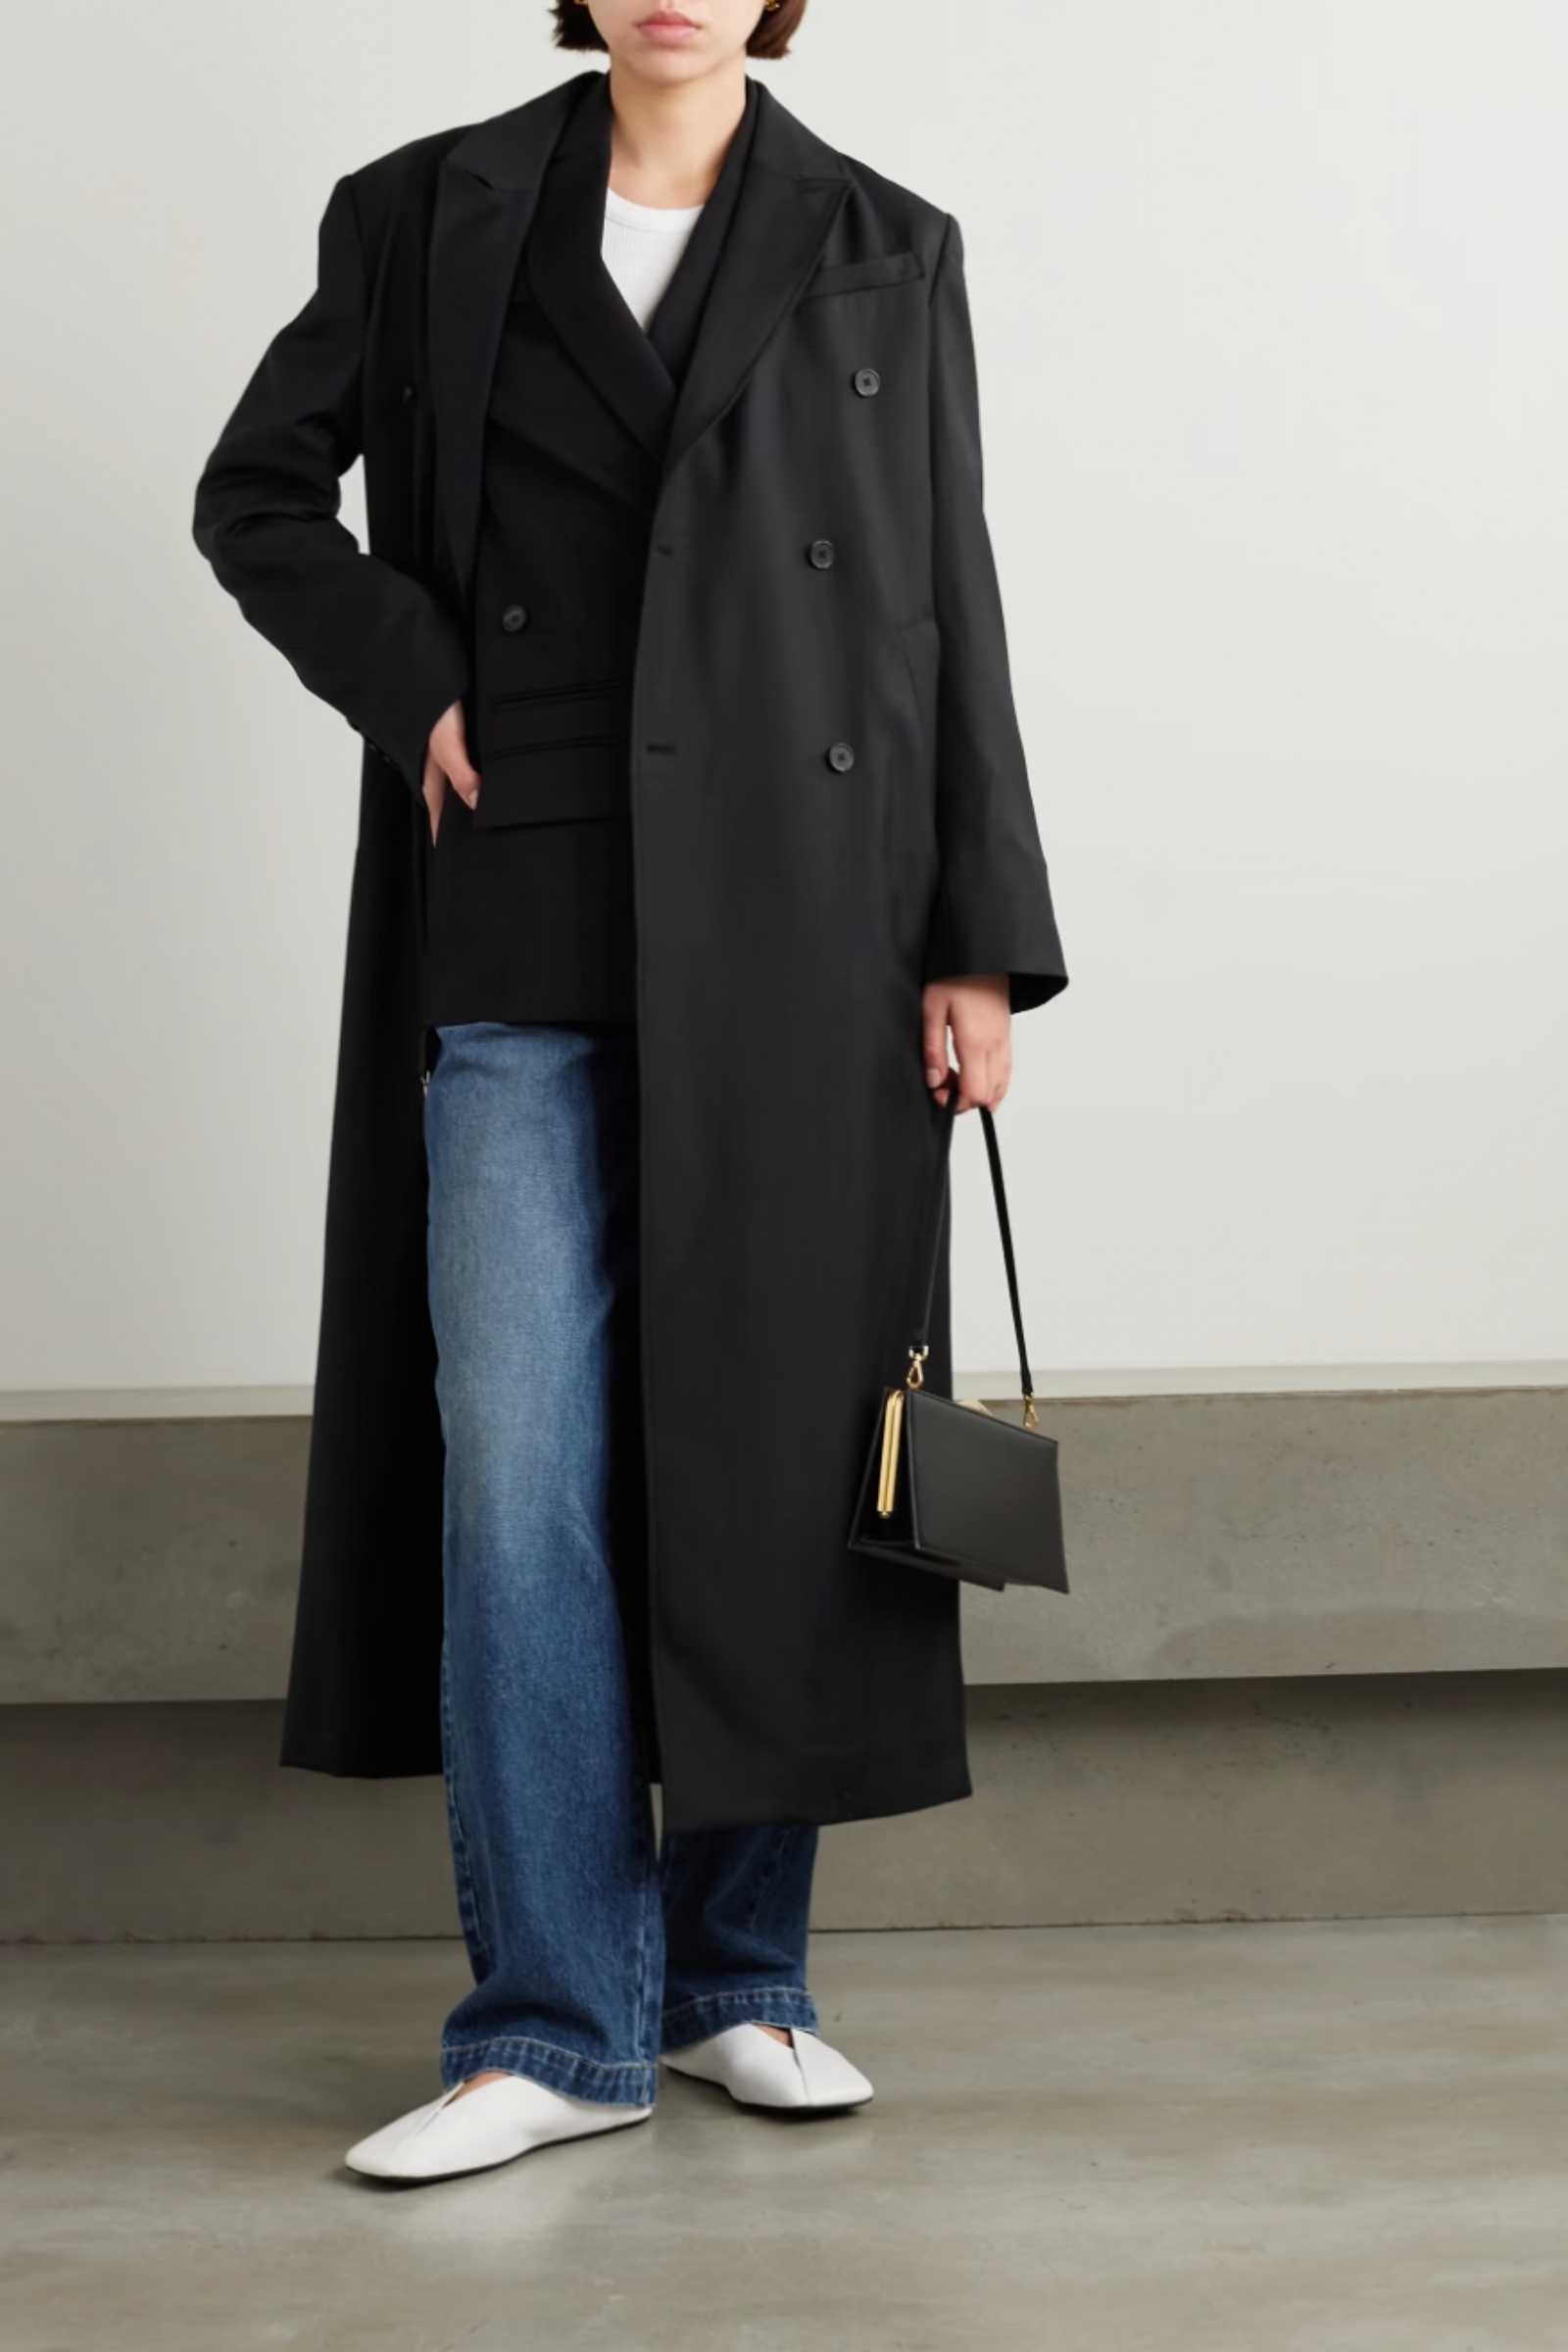 THE FRANKIE SHOP Gaia oversized double-breasted wool-blend felt coat